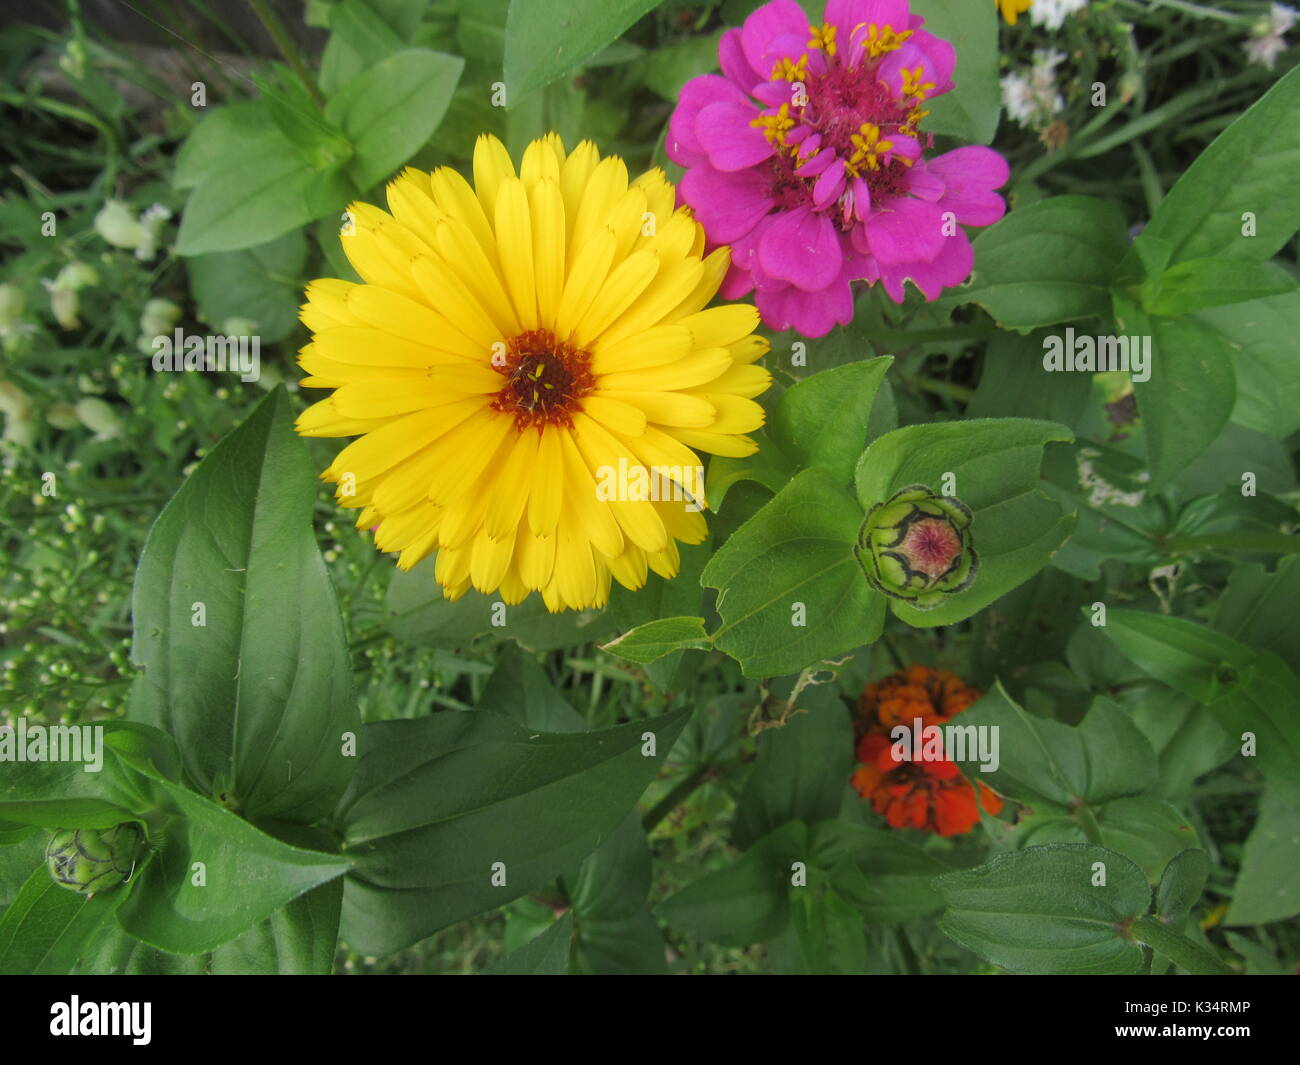 Easy to grow garden flowers in various colors and types.  Daisy type flowers. Stock Photo